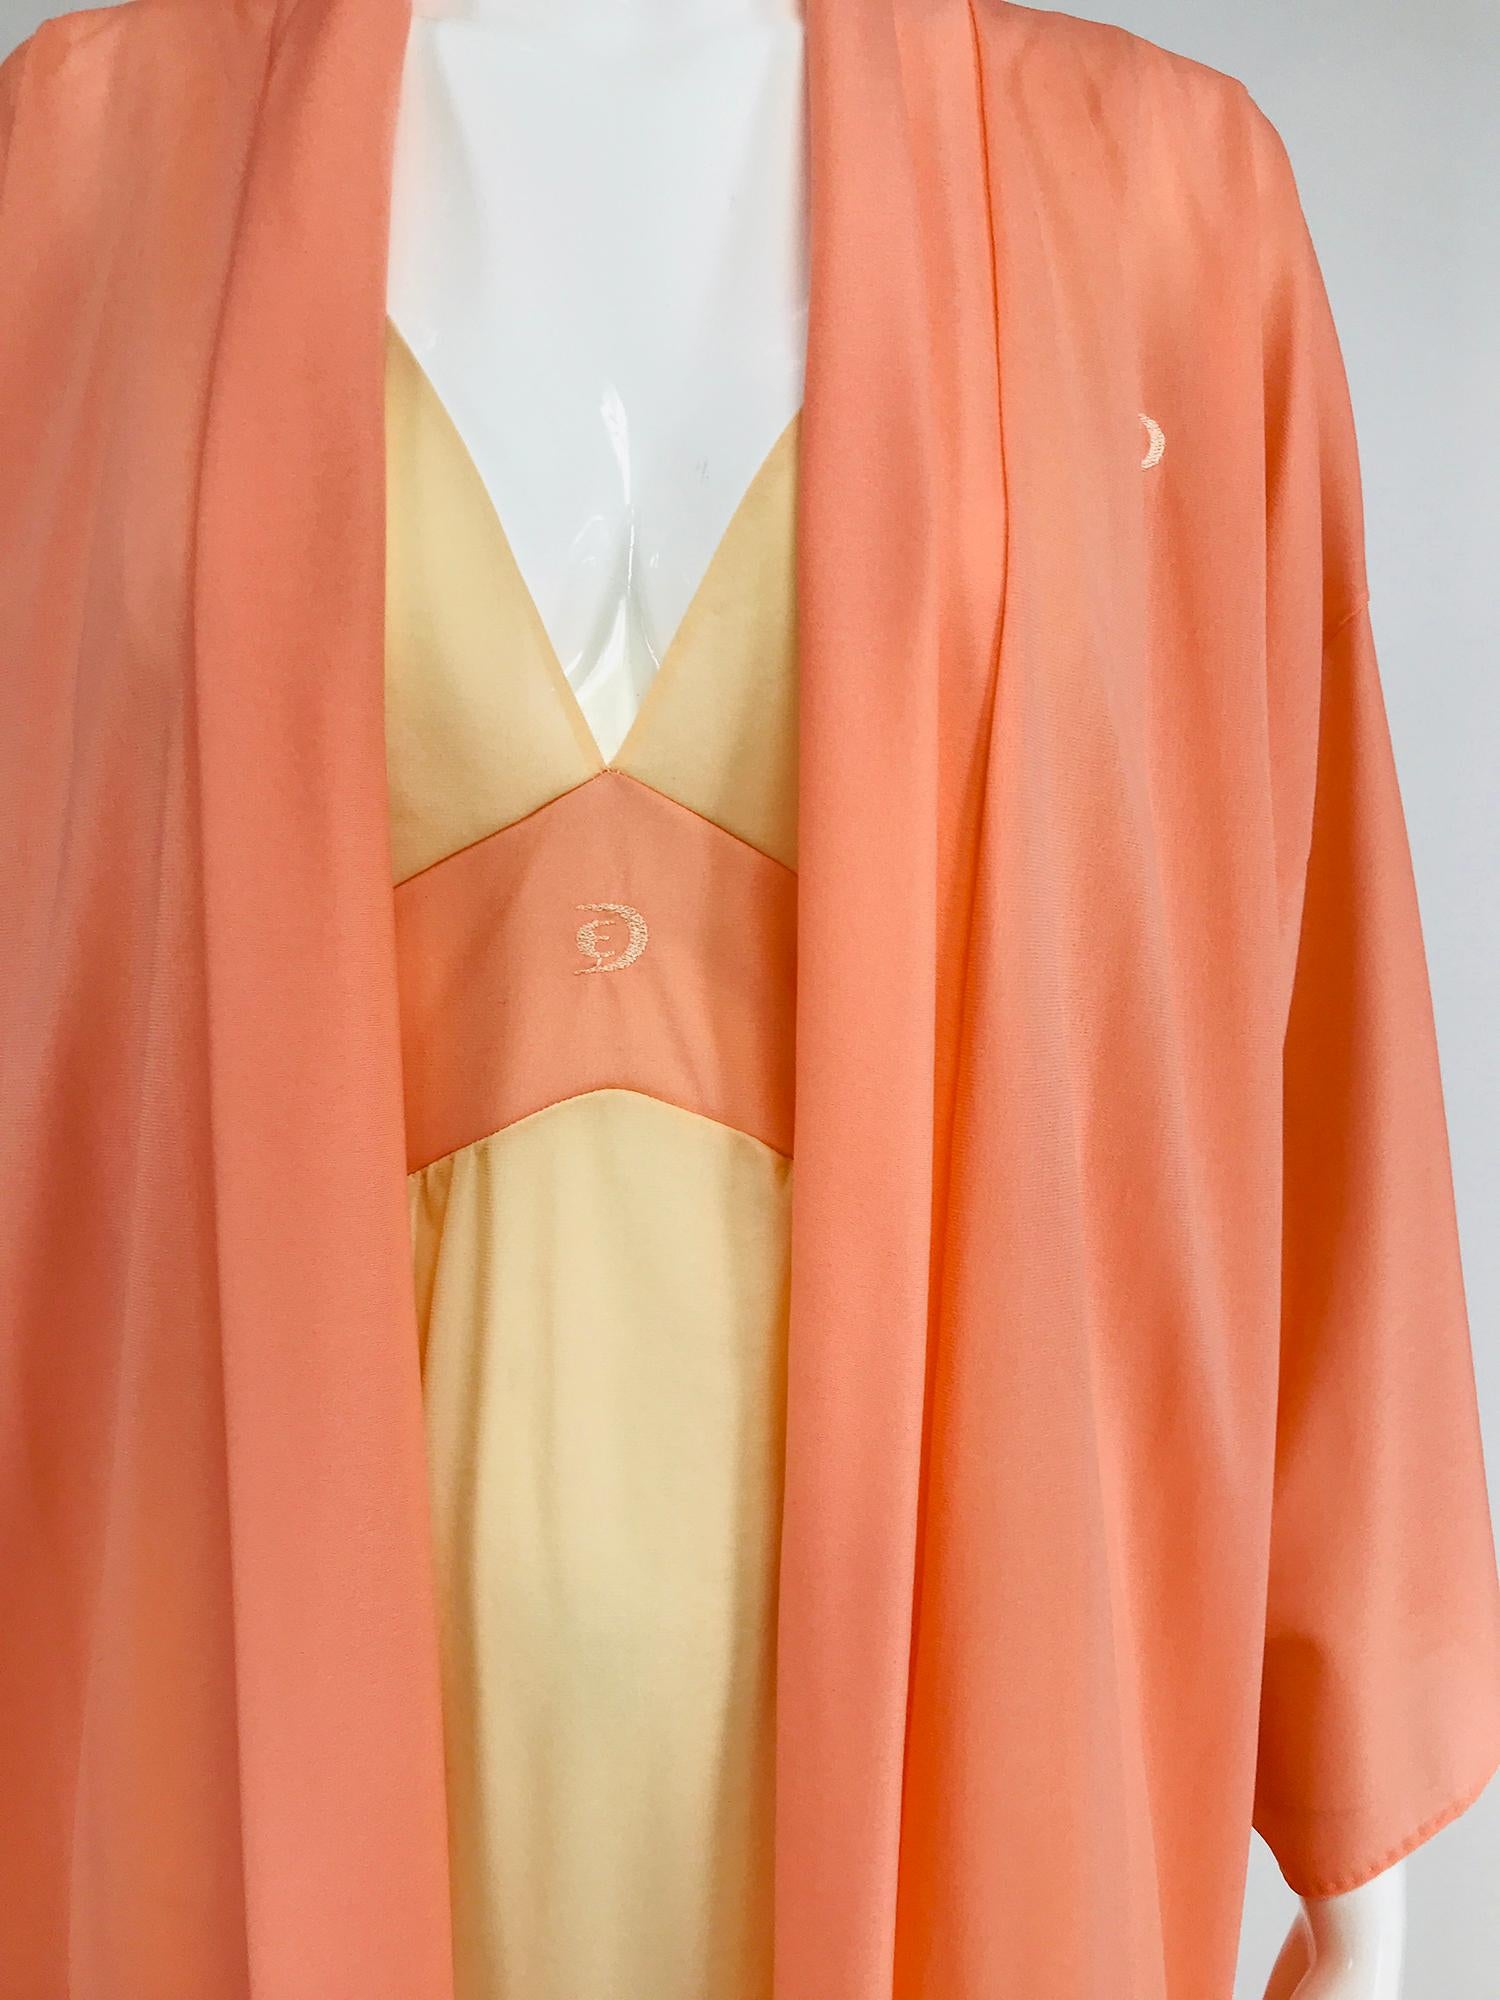 Emilio Pucci for Formfit Rogers 2pc. peignoir in sheer coral & taupe nylon. Long kimono sleeve wrap front gown, the belt is missing, in coral. The matching night gown is pull on with a V neckline front and back, high waist band and slightly full